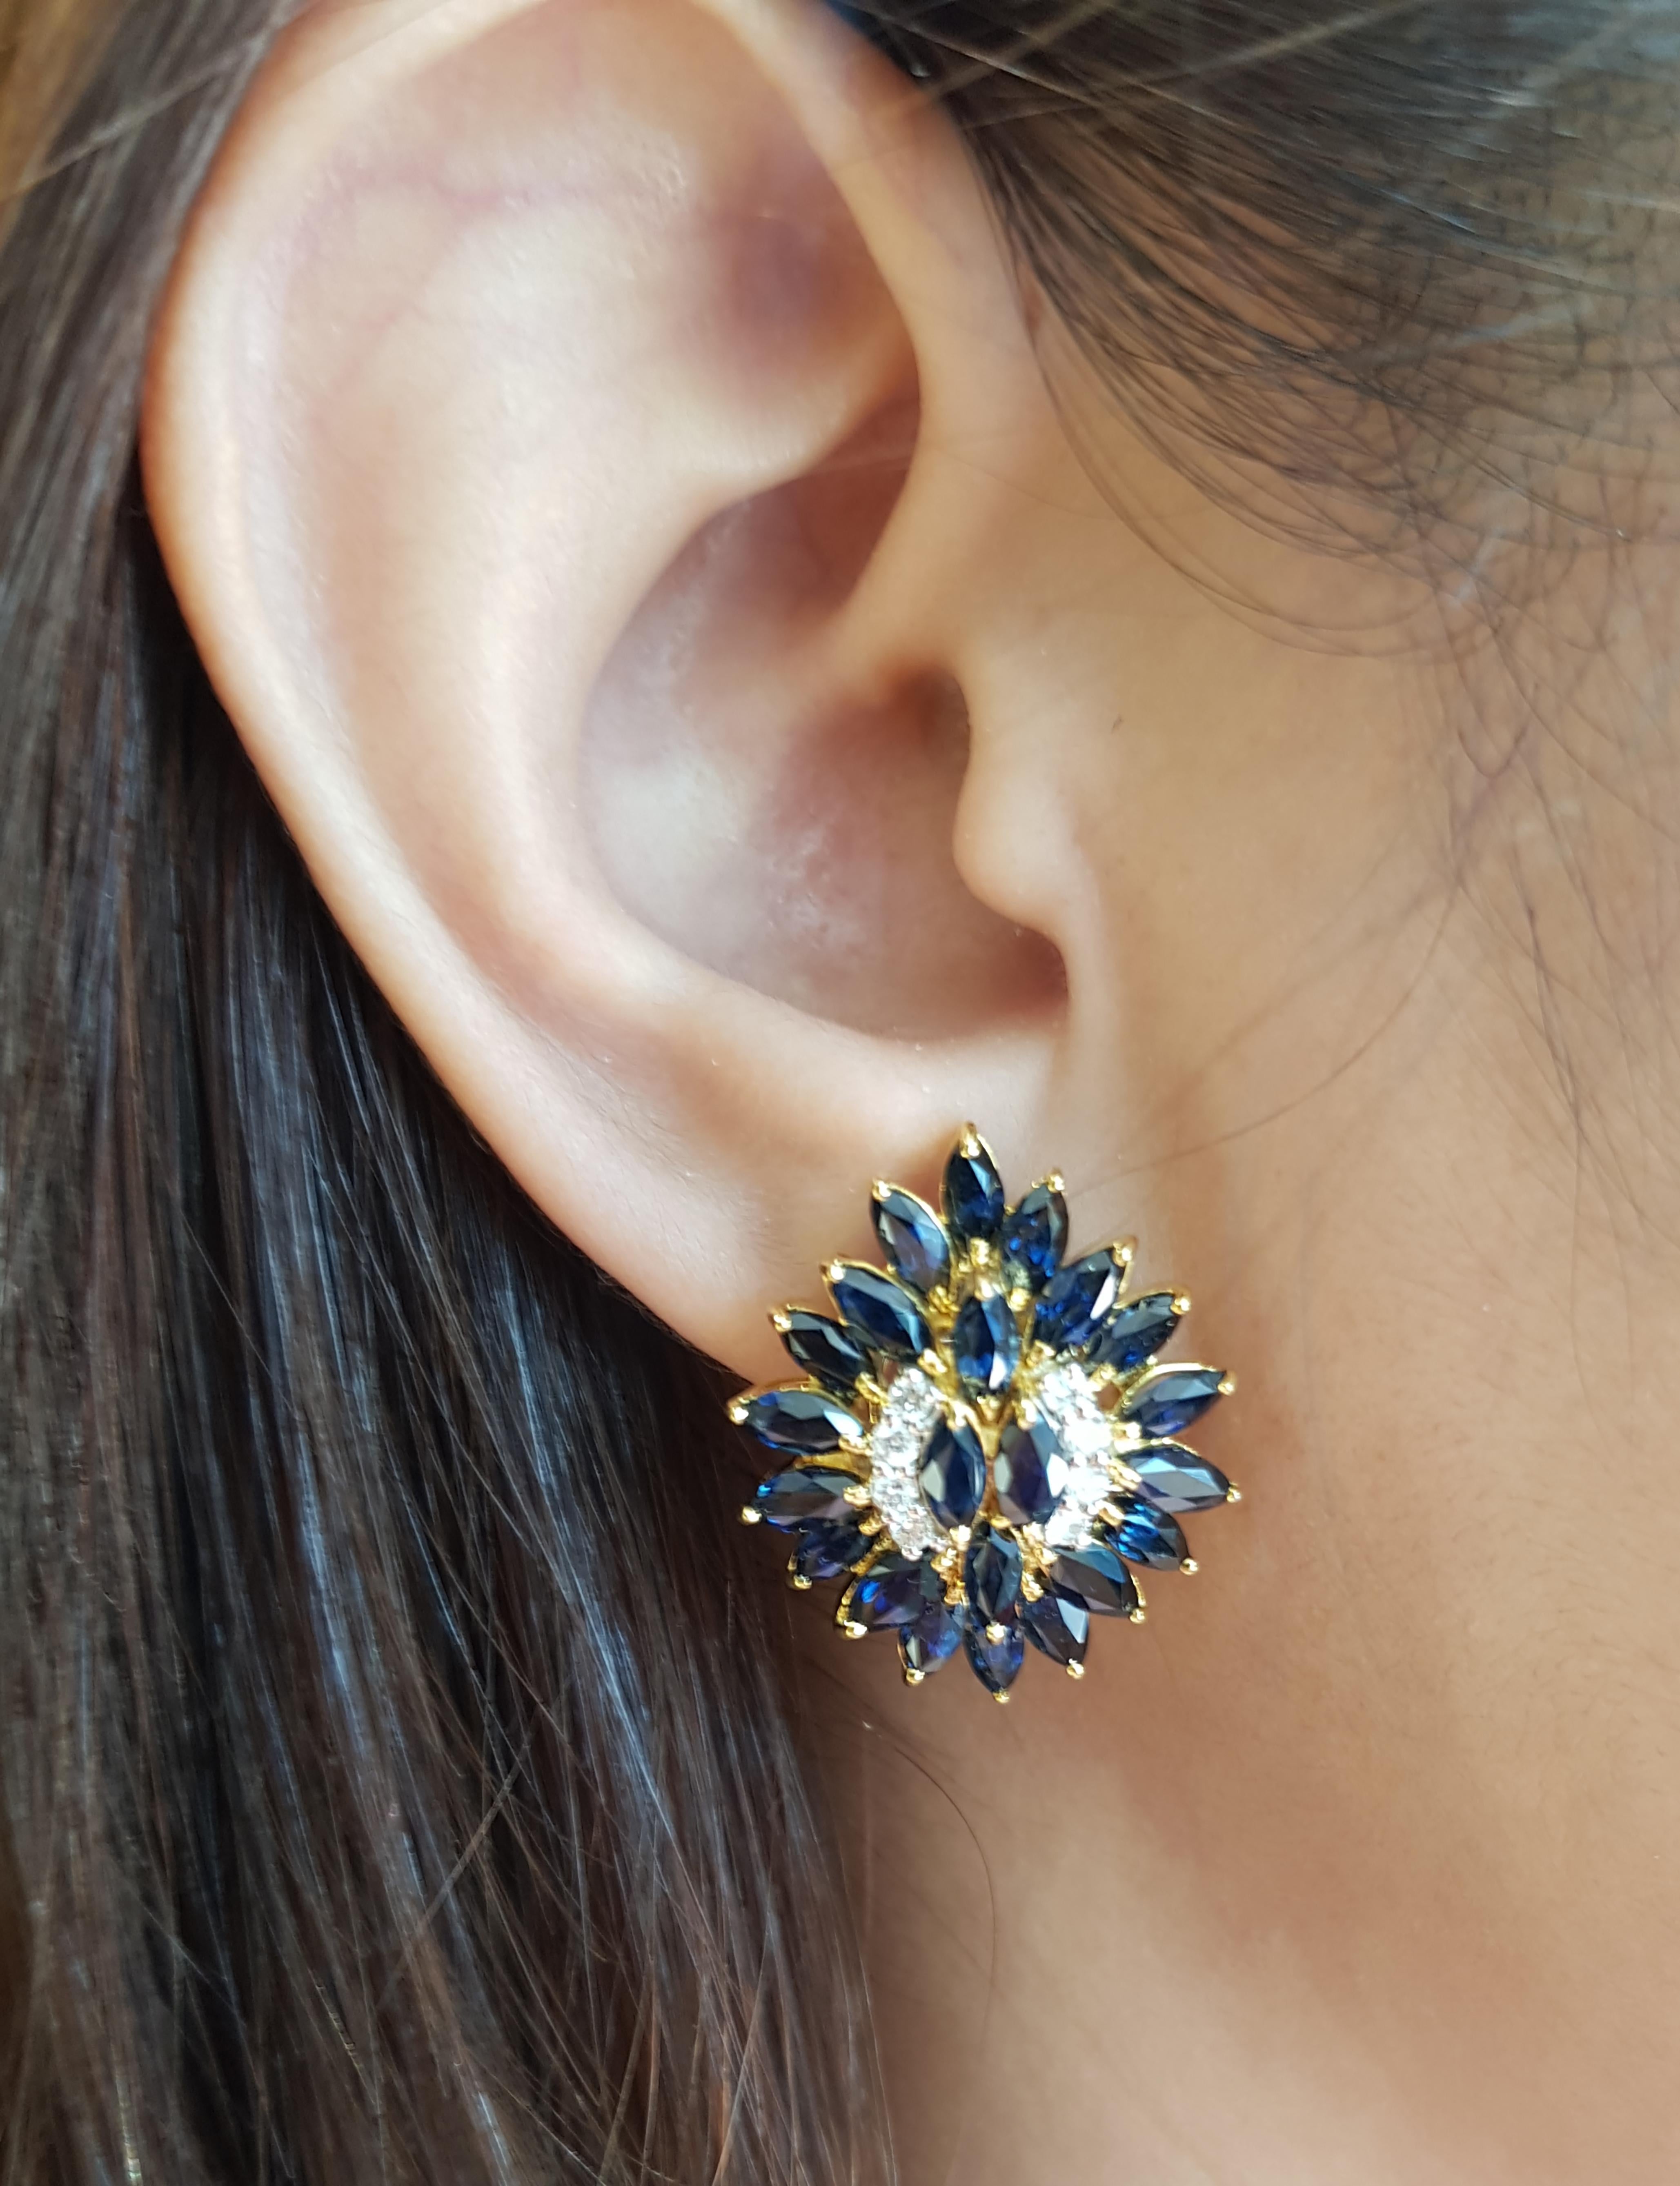 Blue Sapphire 14.83 carats with Diamond 0.35 carat Earrings set in 18 Karat Gold Settings

Width:  2.2 cm 
Length: 2.3 cm
Total Weight: 14.63 grams

